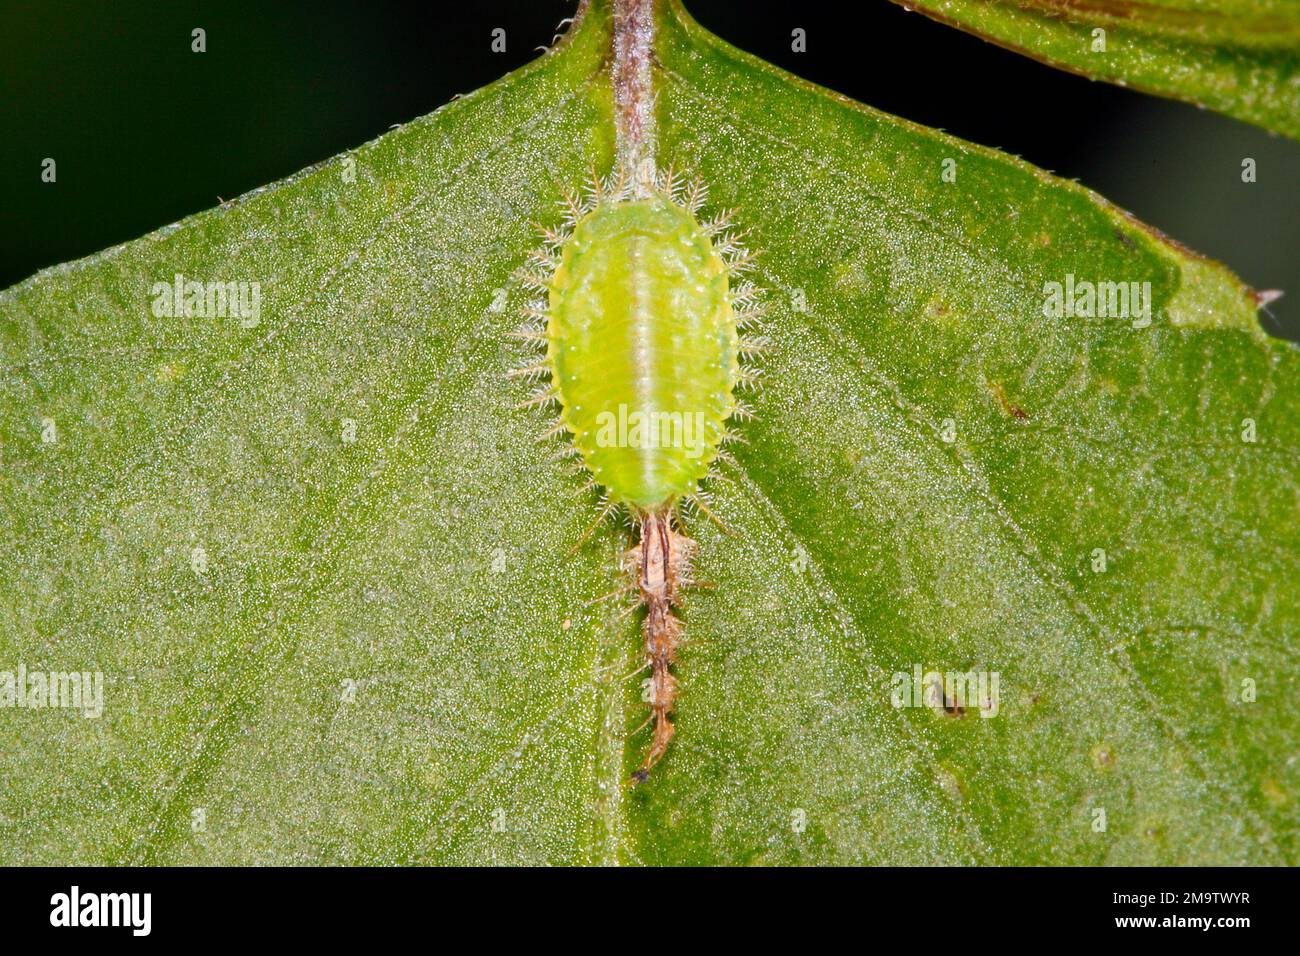 Mottled Tortoise Beetle Larvae, either Deloyala guttata or Deloyala fuliginosa. Larva in final stage before pupating as shown by 4 previous skin sheds Stock Photo